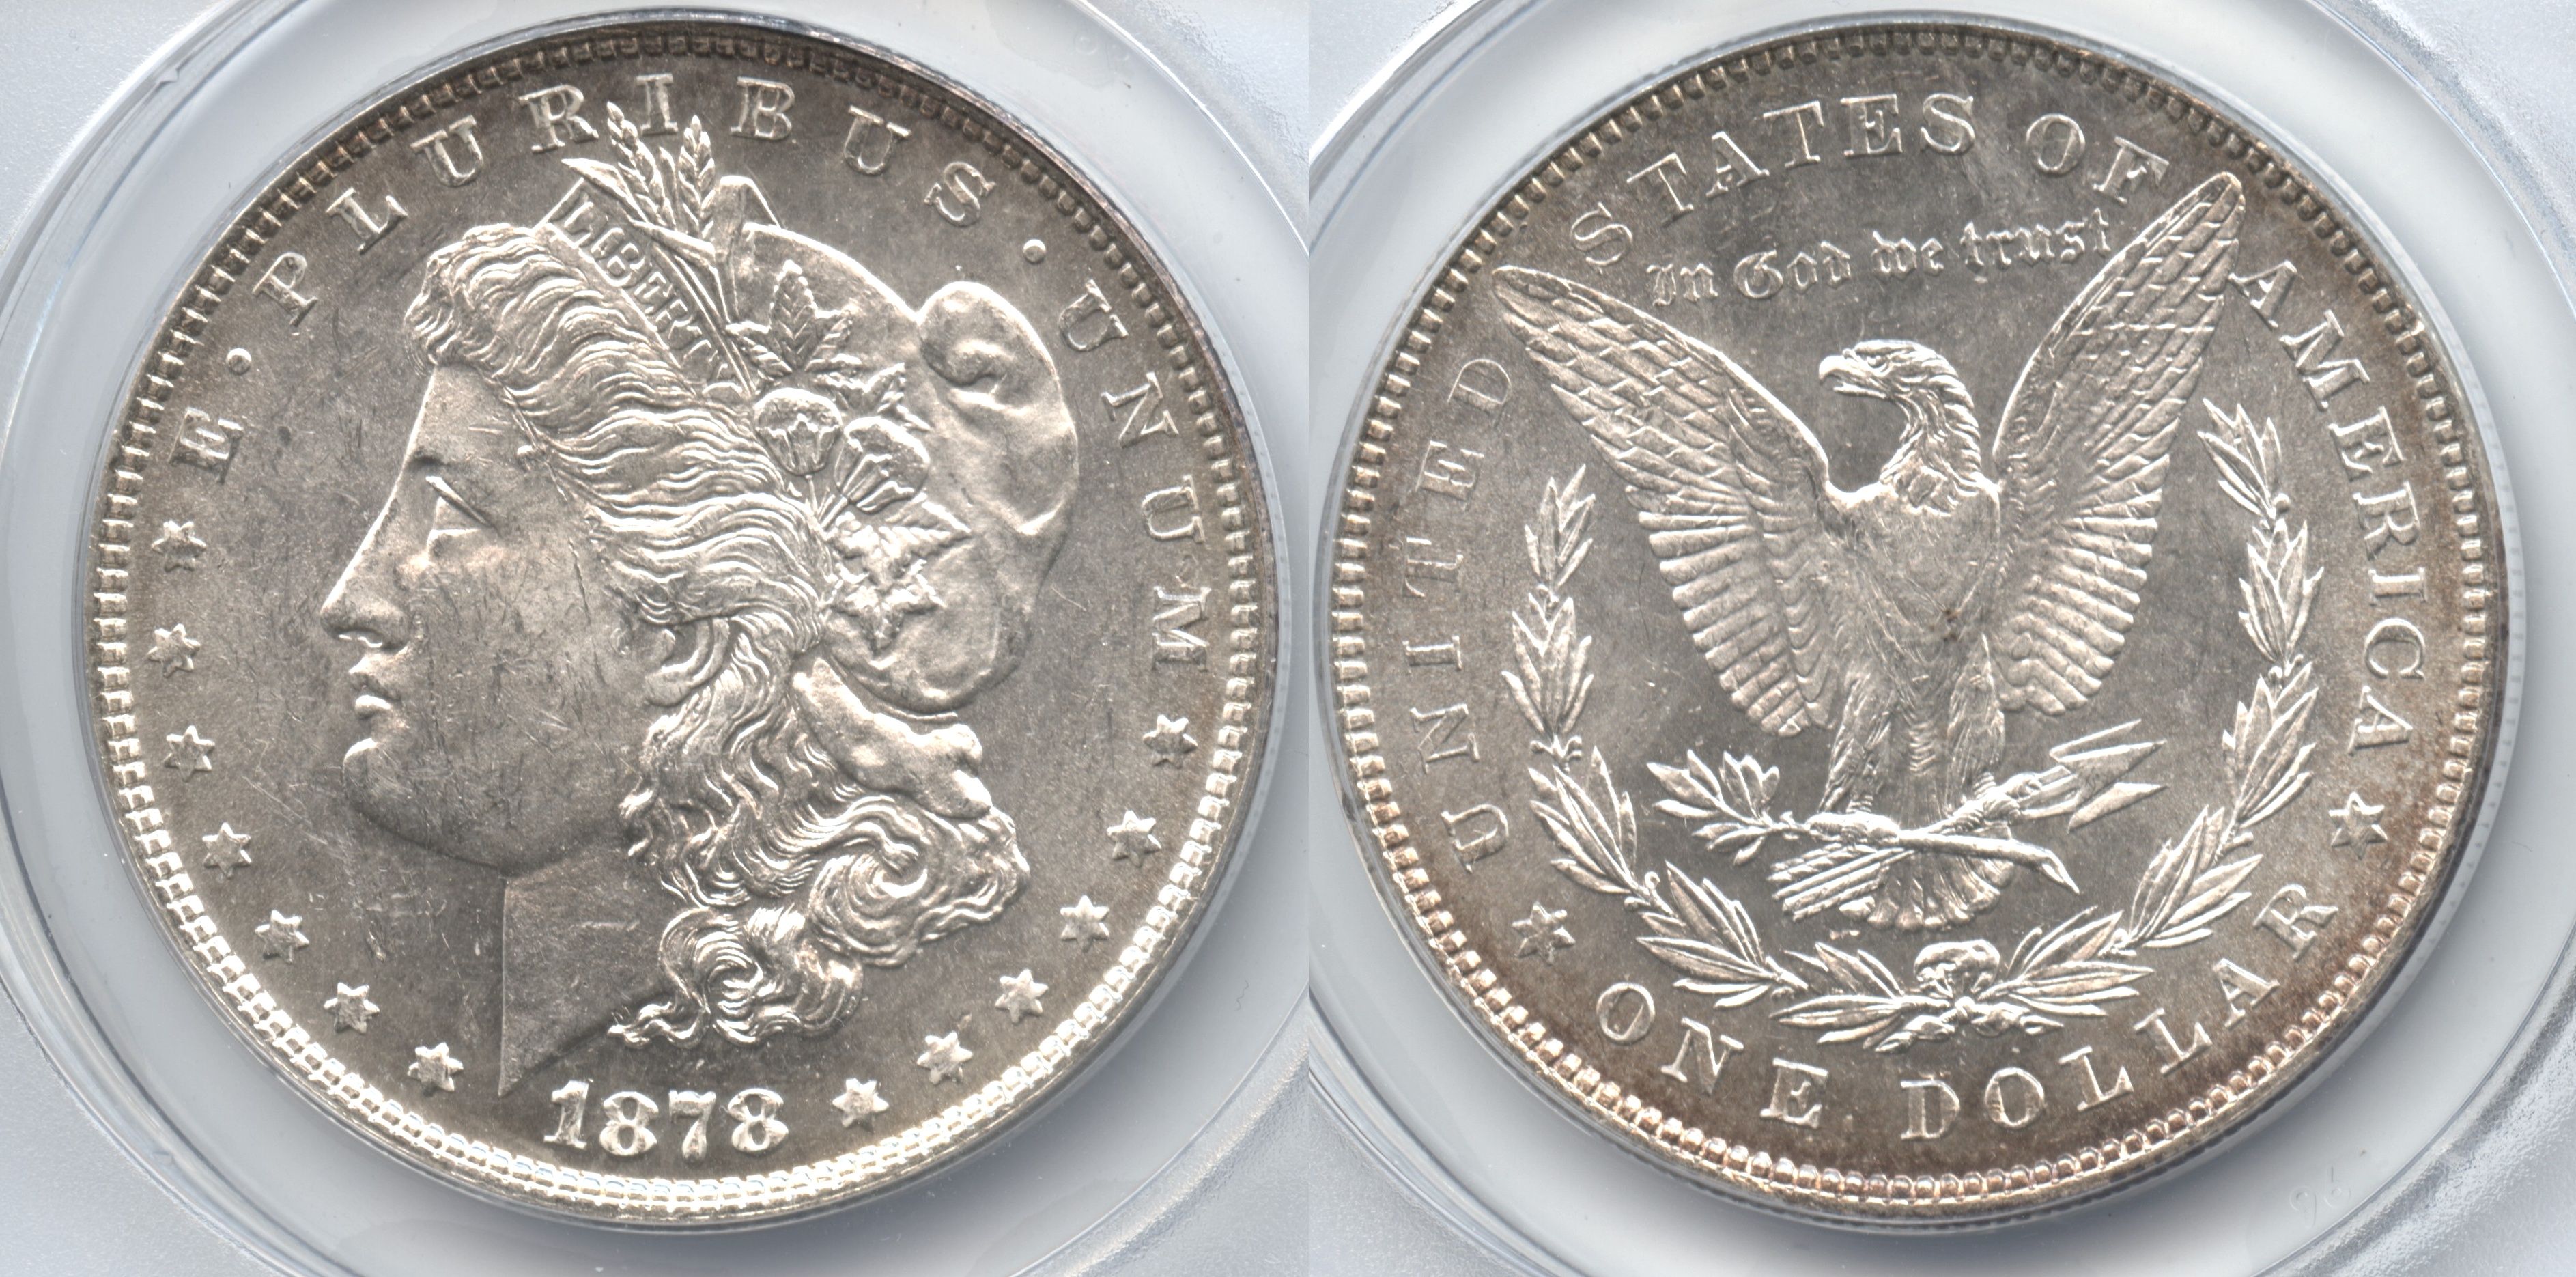 1878 7 Over 8 Tailfeathers Morgan Silver Dollar ANACS MS-62